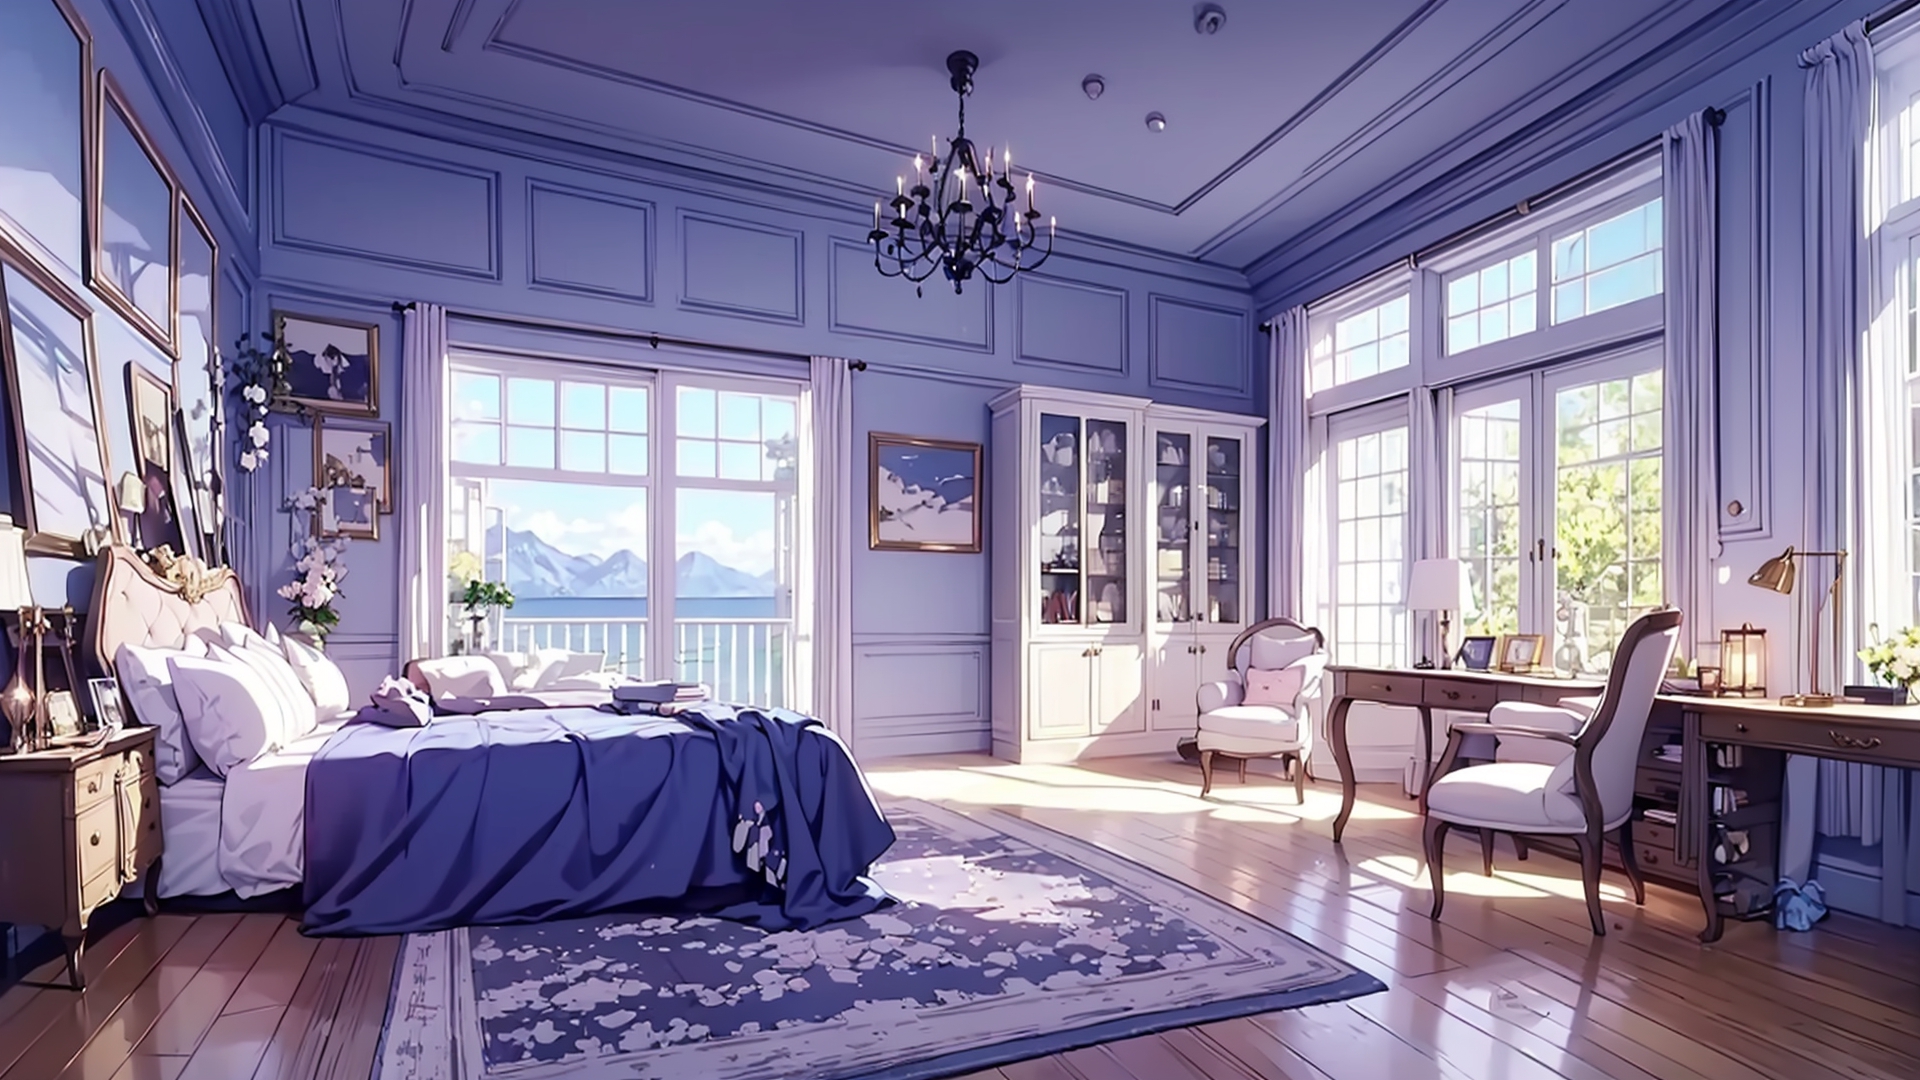 429 Anime Room Stock Video Footage - 4K and HD Video Clips | Shutterstock